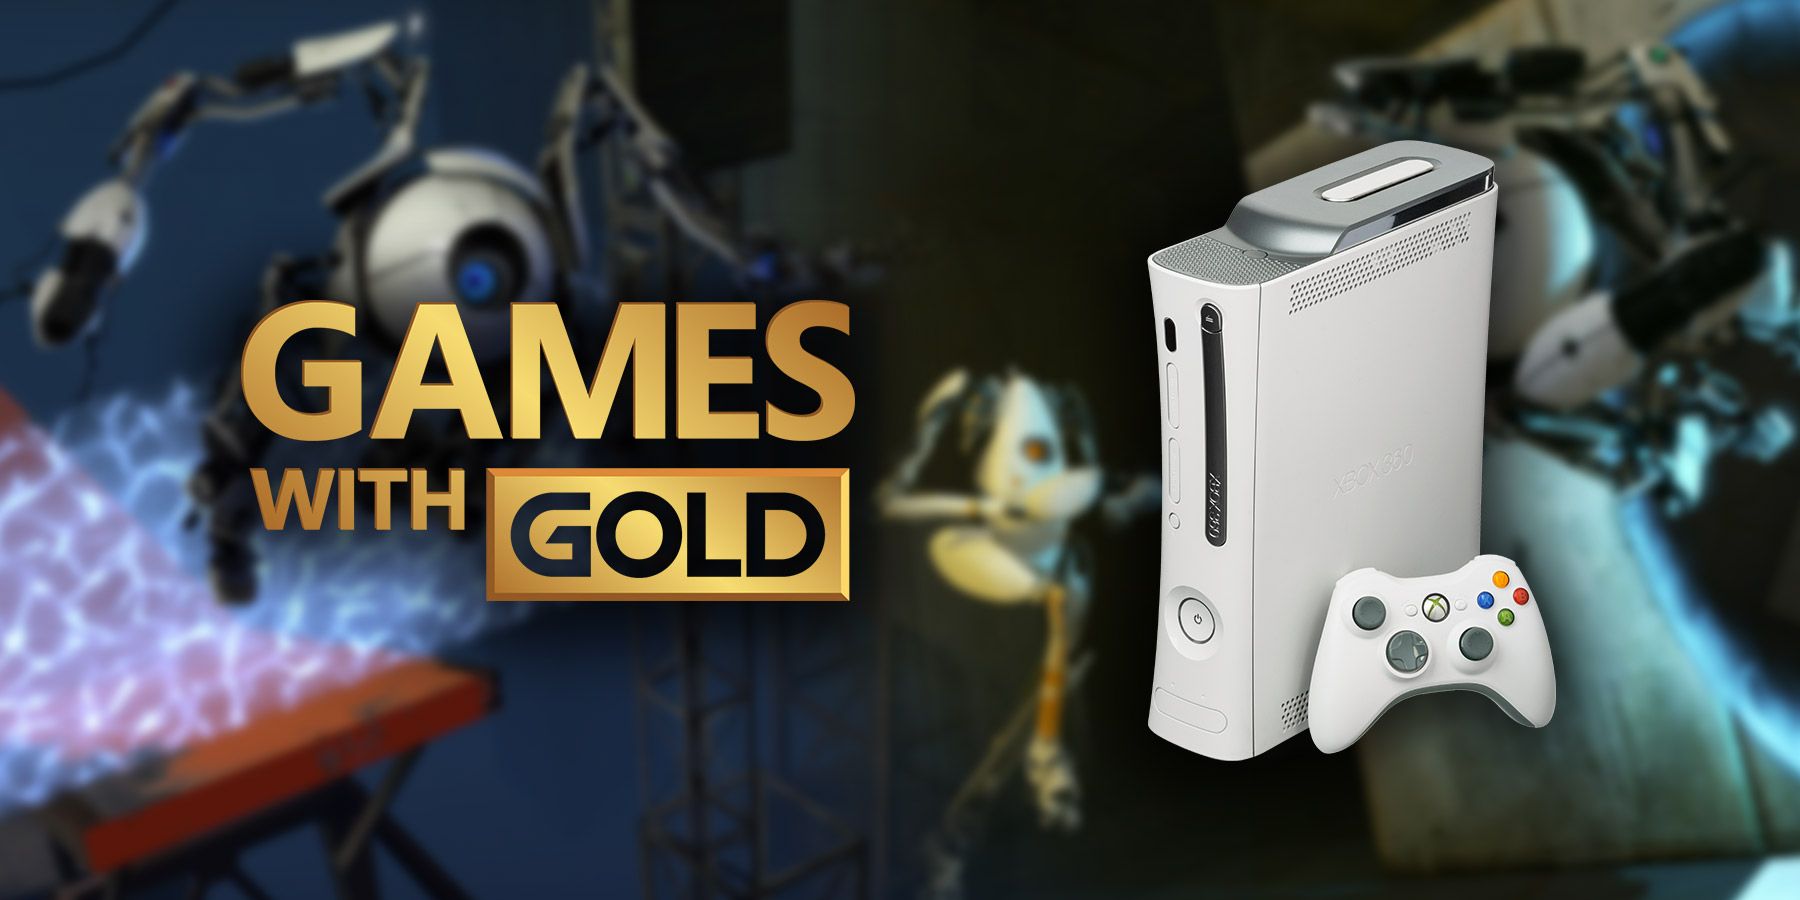 Bedienen Kiwi Ontspannend Xbox 360 Games With Gold Are Ending With a Bang